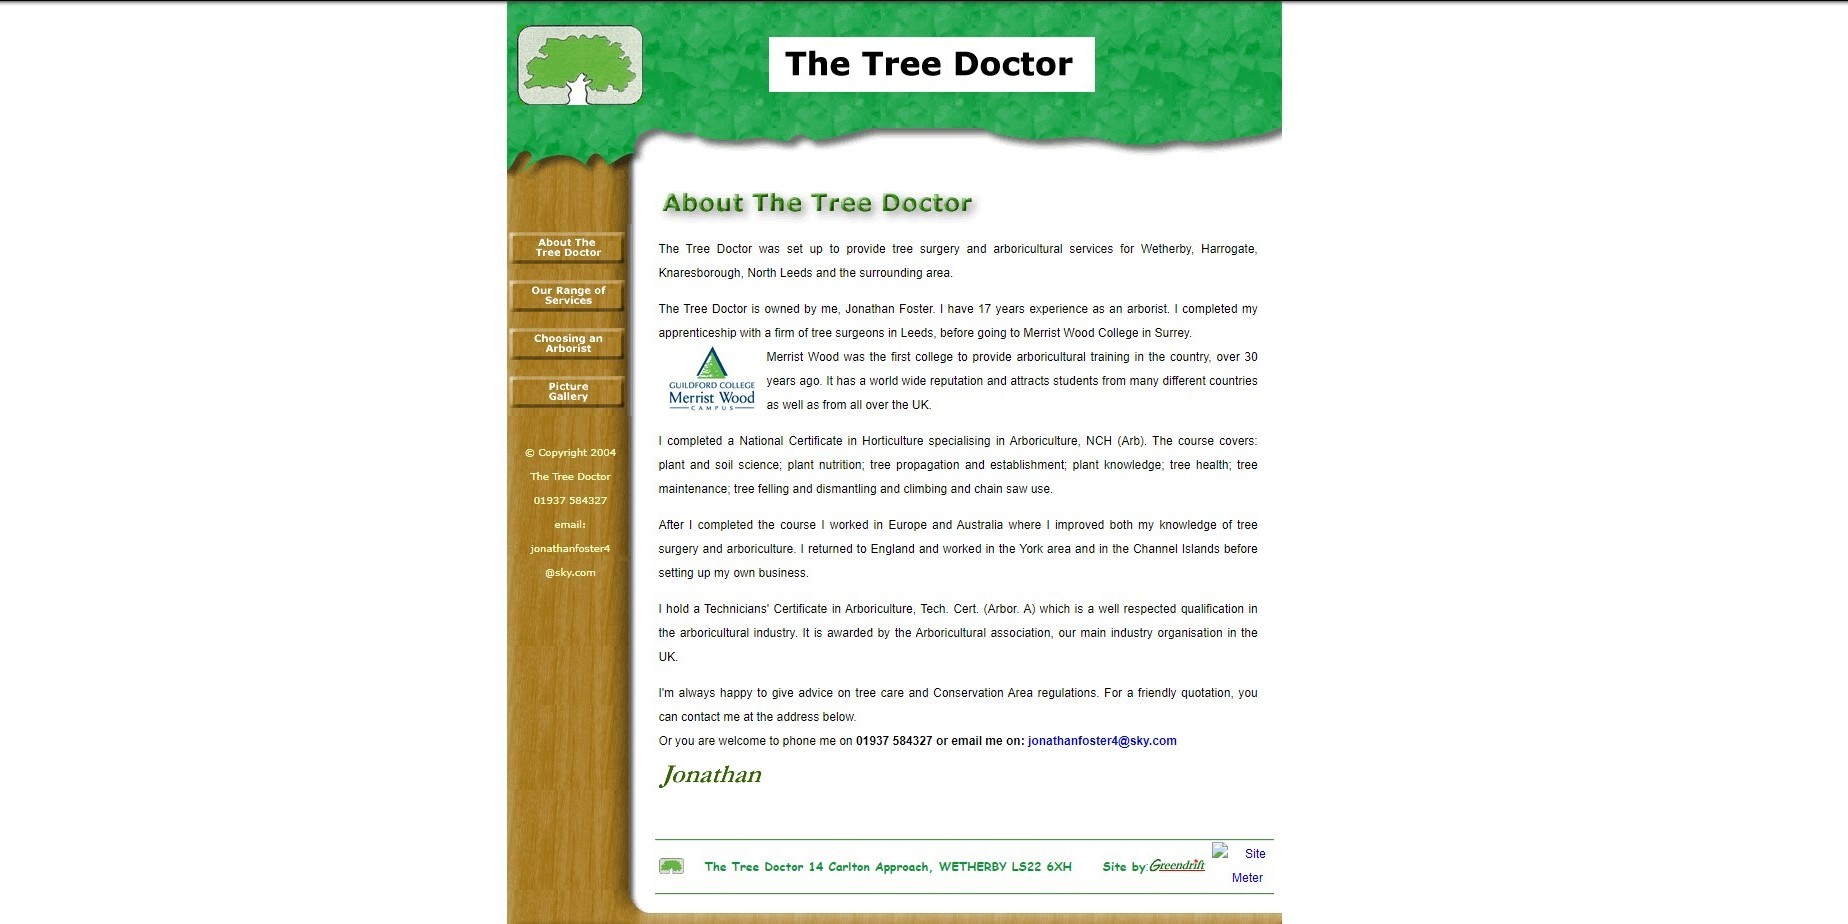 The previous Tree Doctor website shown on desktop